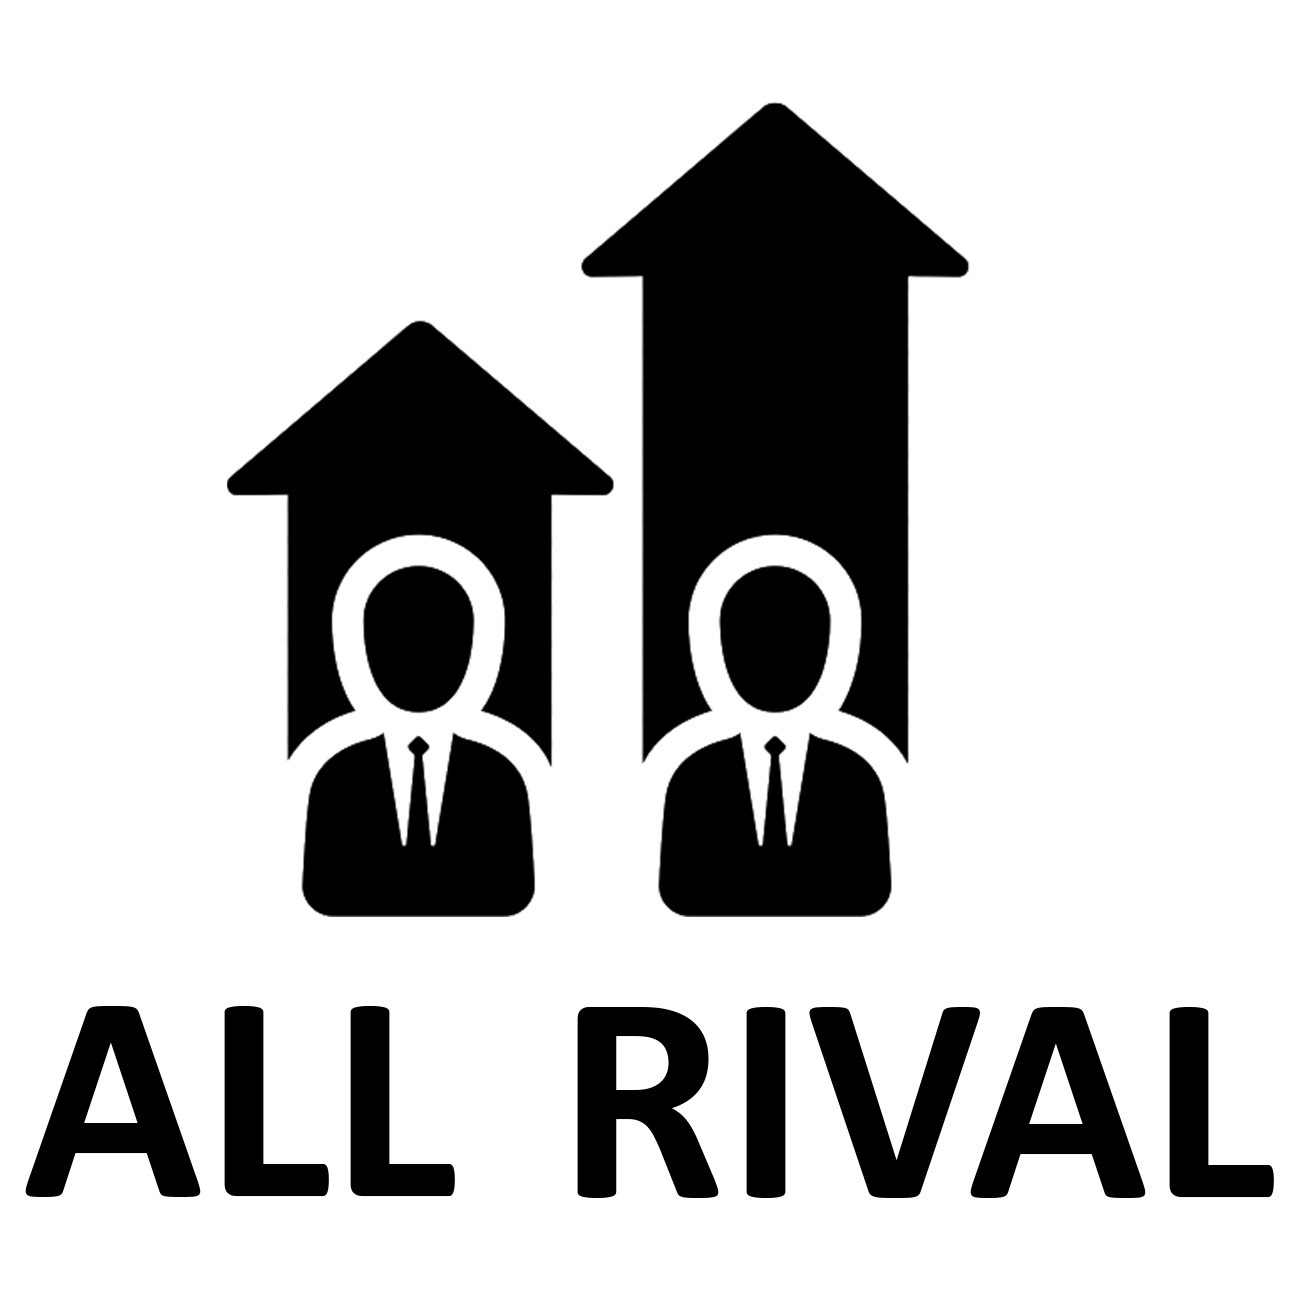 ALL RIVAL